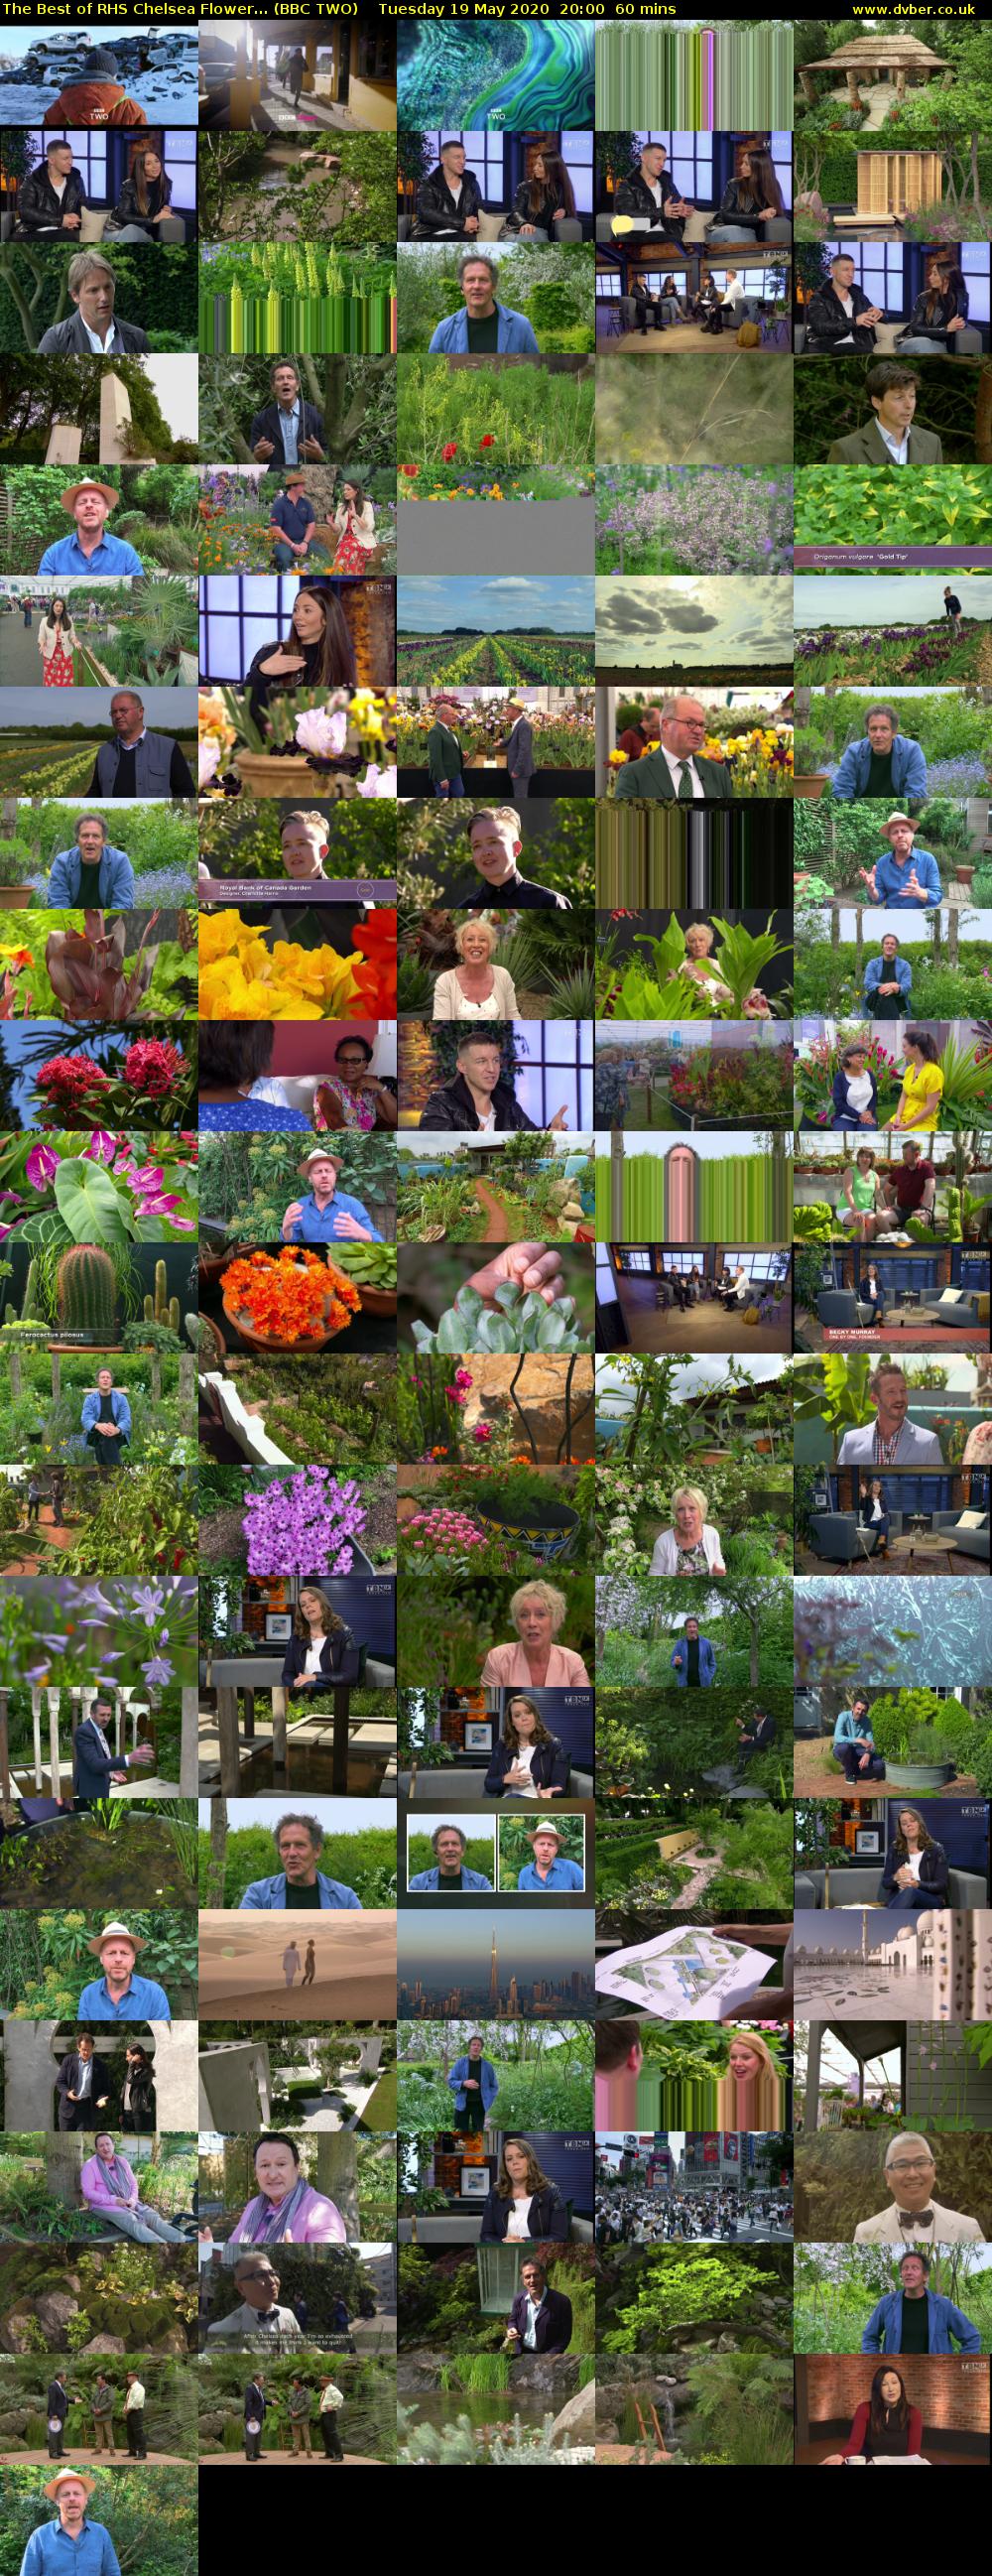 The Best of RHS Chelsea Flower... (BBC TWO) Tuesday 19 May 2020 20:00 - 21:00